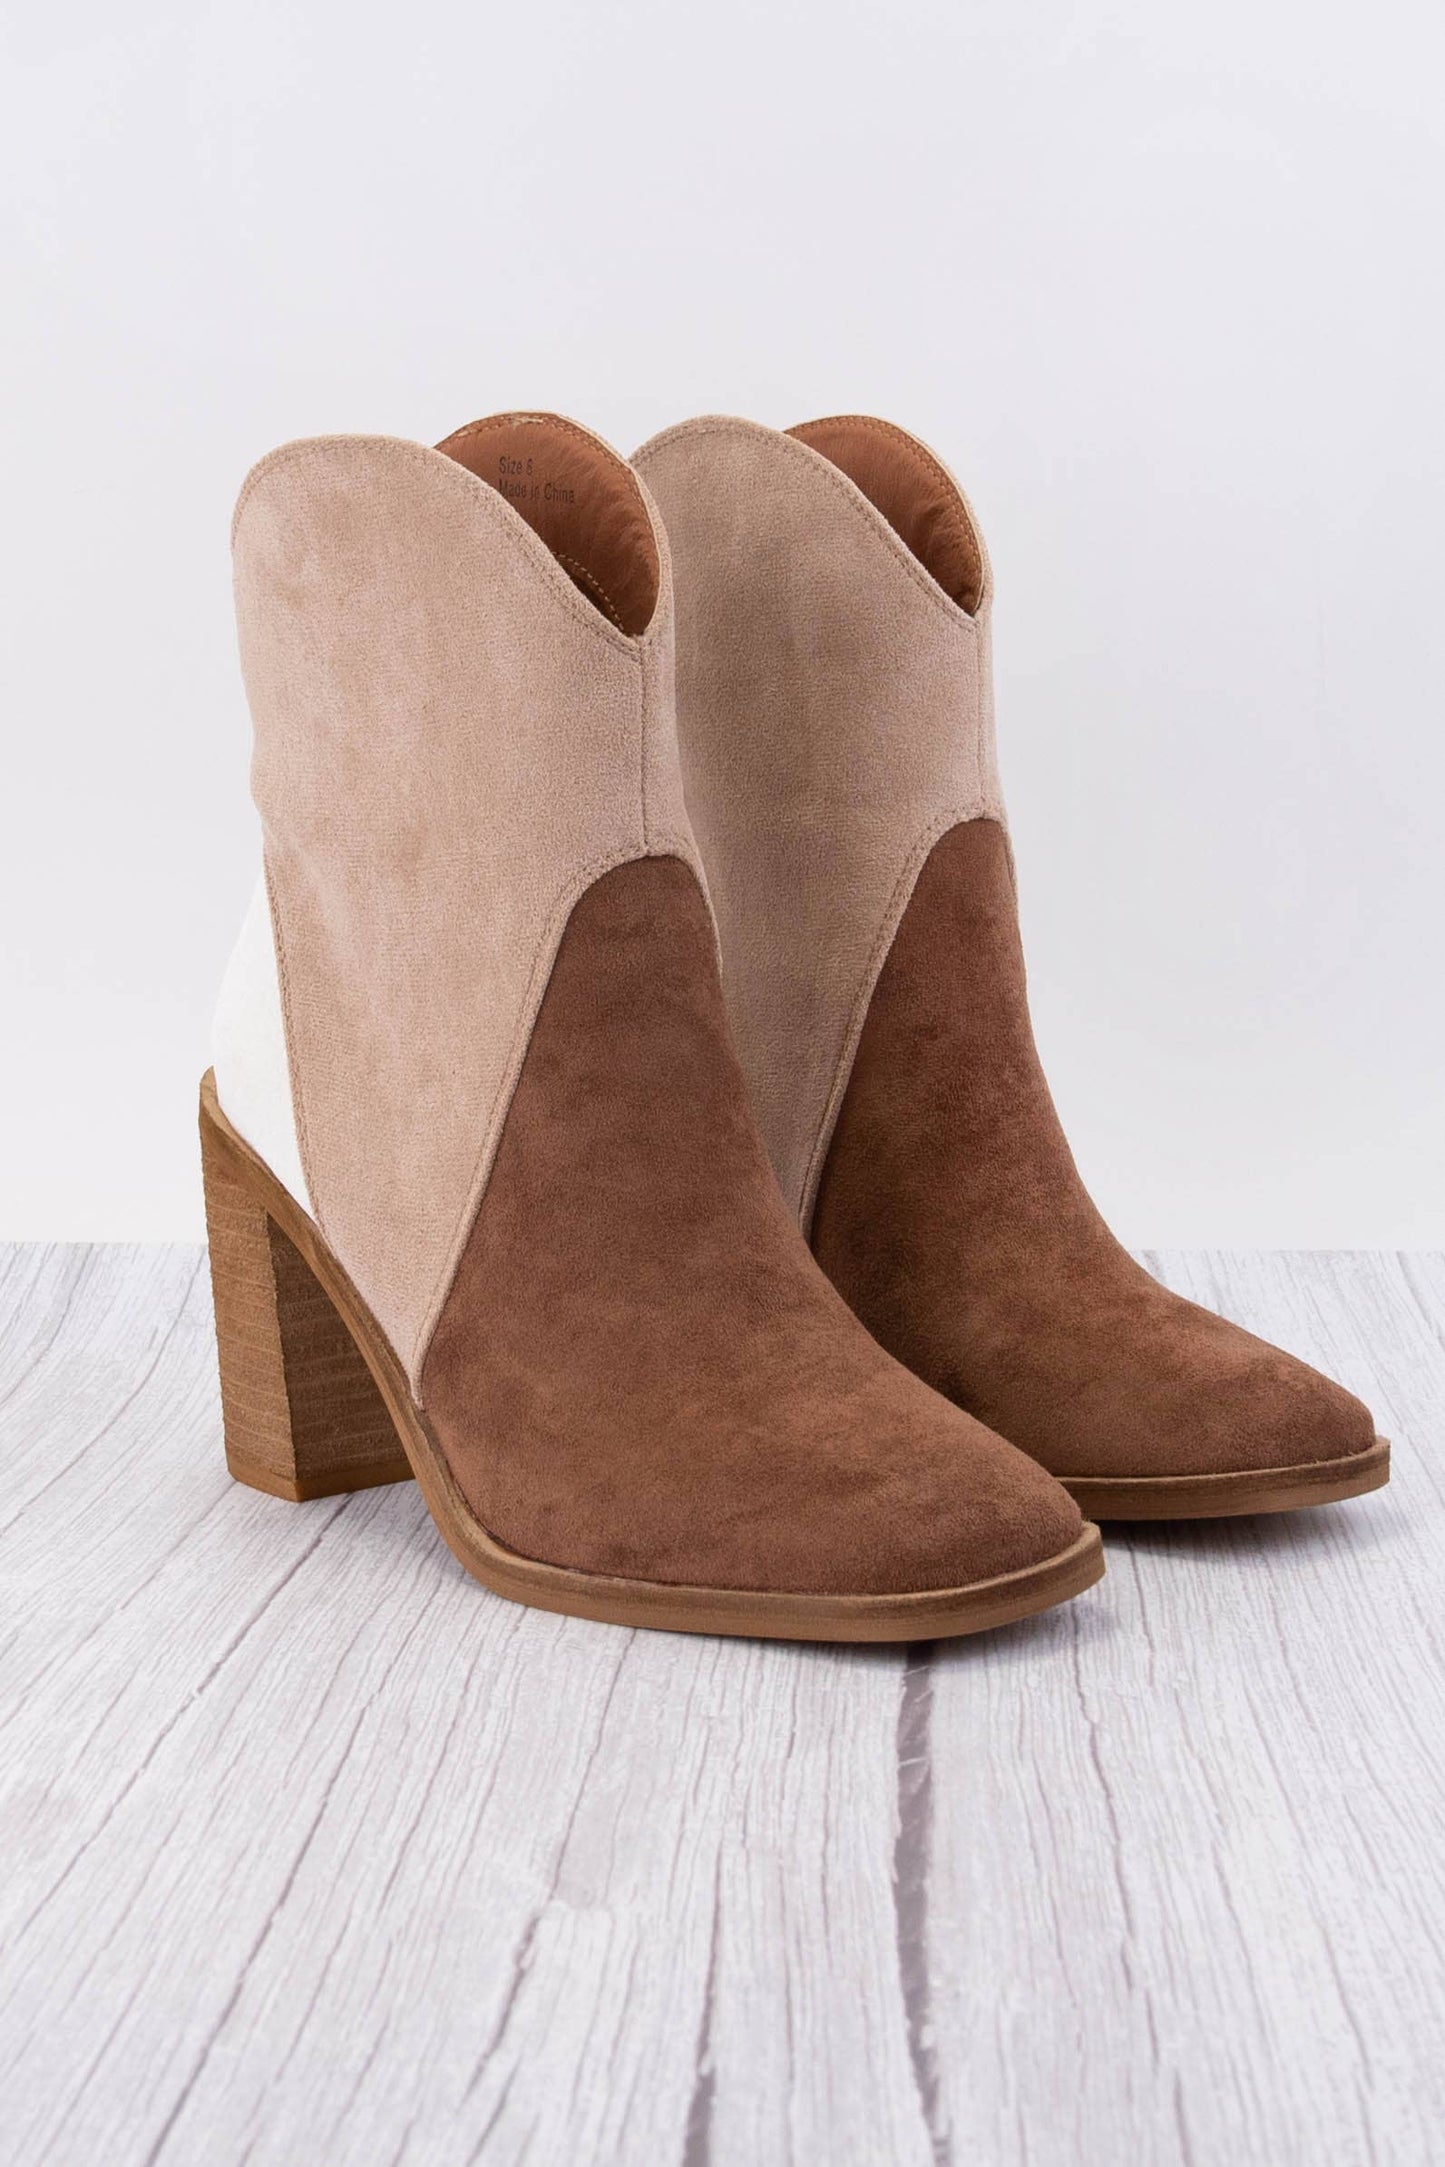 TRI-TONE BOOTIE WITH SQUARE TOE: CAMEL/TAUPE/BEIGE CROC